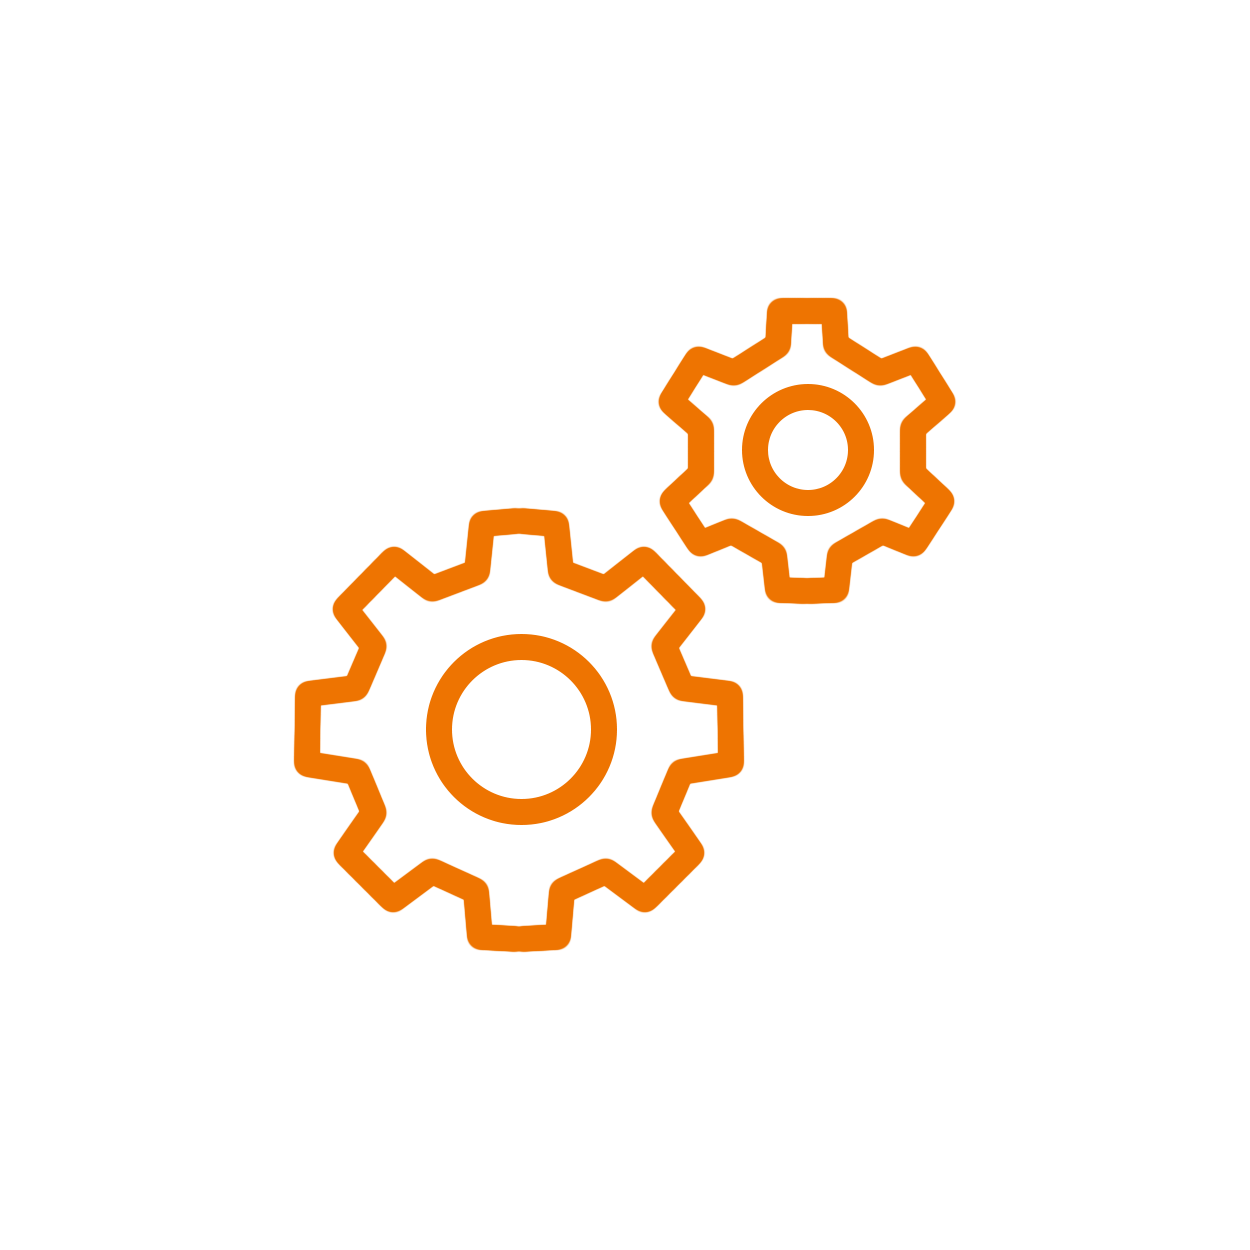 Icon showing gears